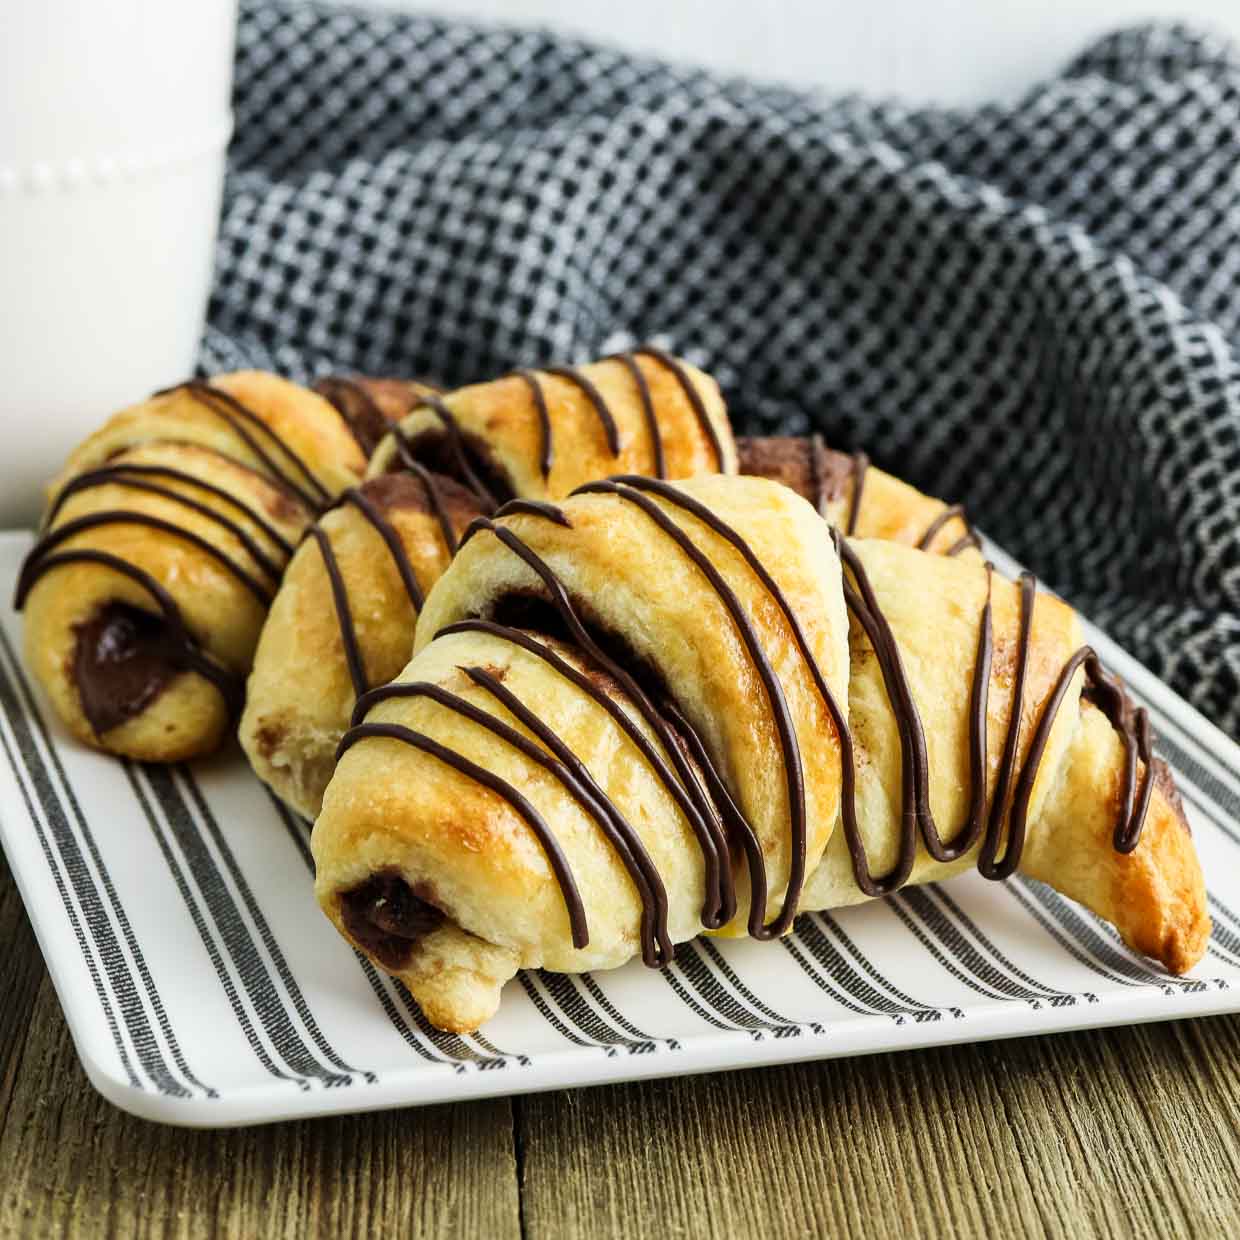 Three nutella crescent rolls on a plate drizzled with chocolate.